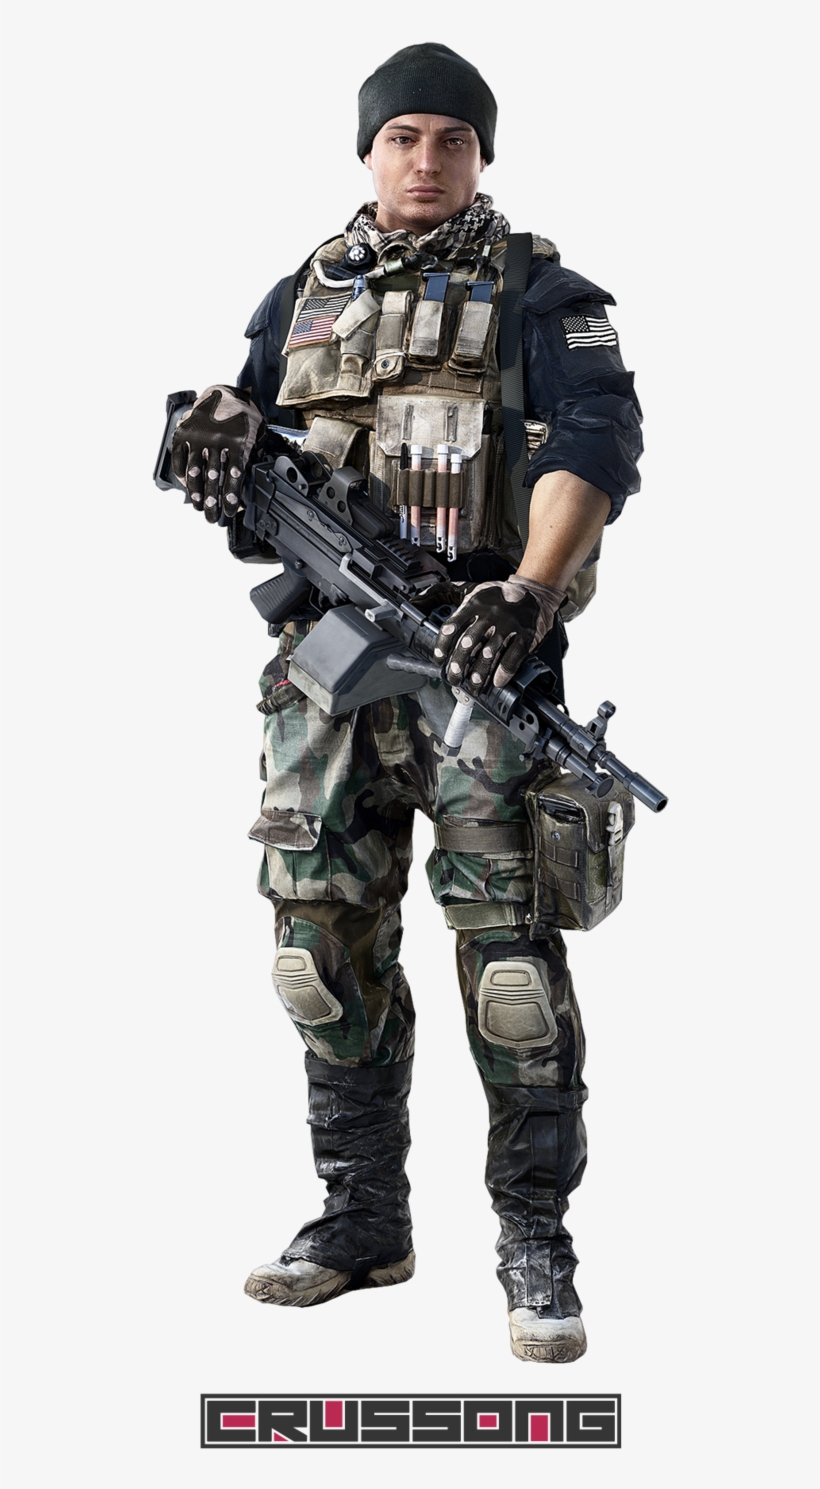 Soldier Png Image - Battlefield 4 Characters, transparent png #5945883